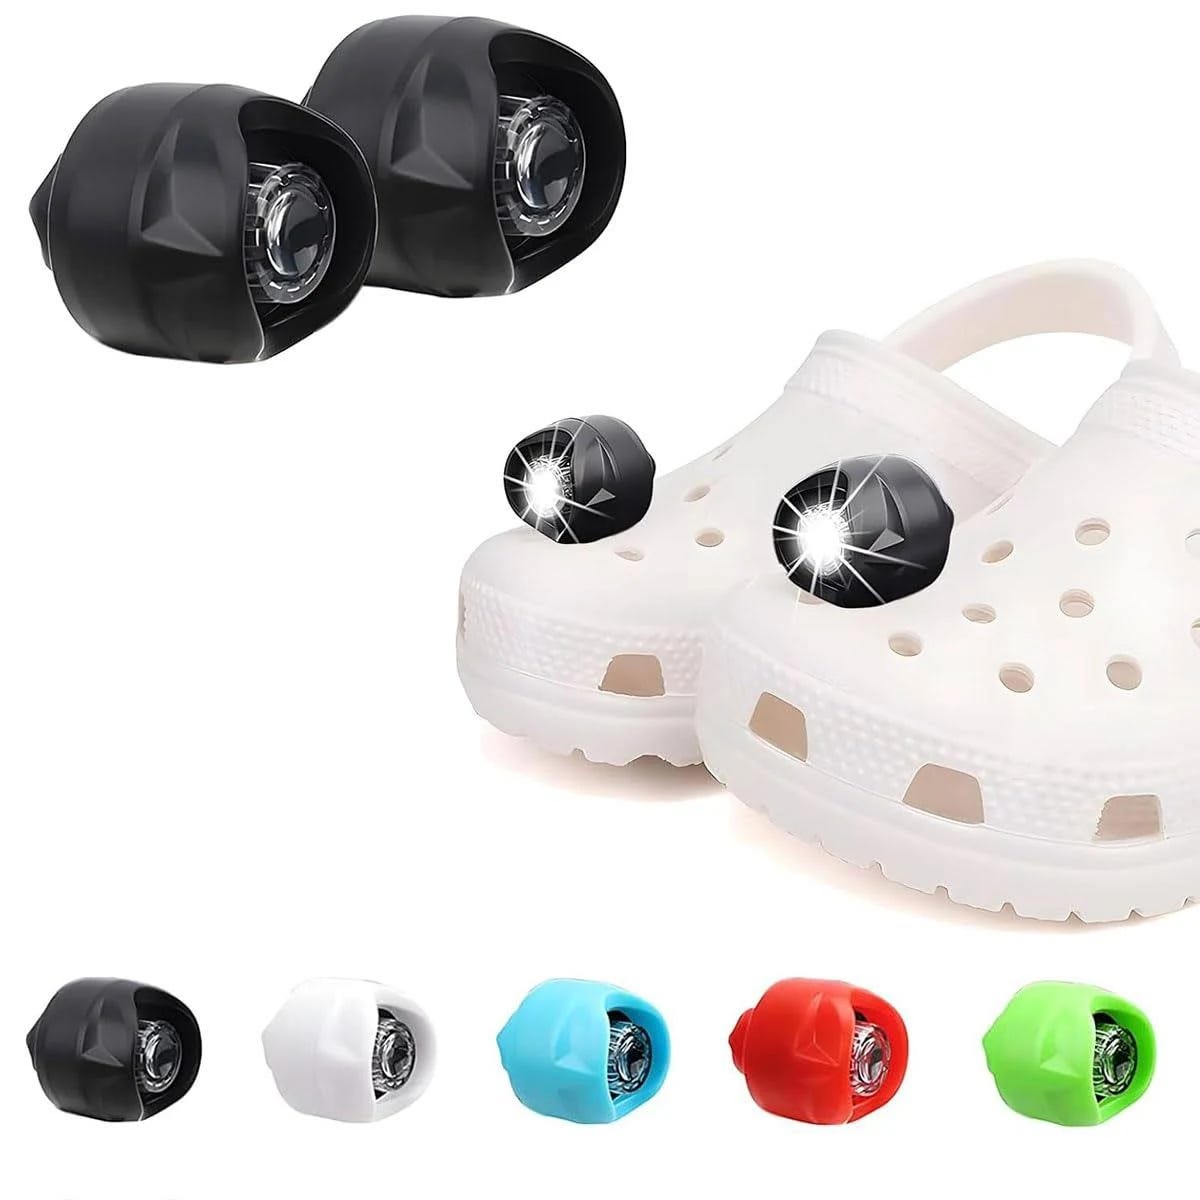 Get Ready for Adventure: Handy Croc Lights for Shoes and Hands-Free Headlights Set | Image